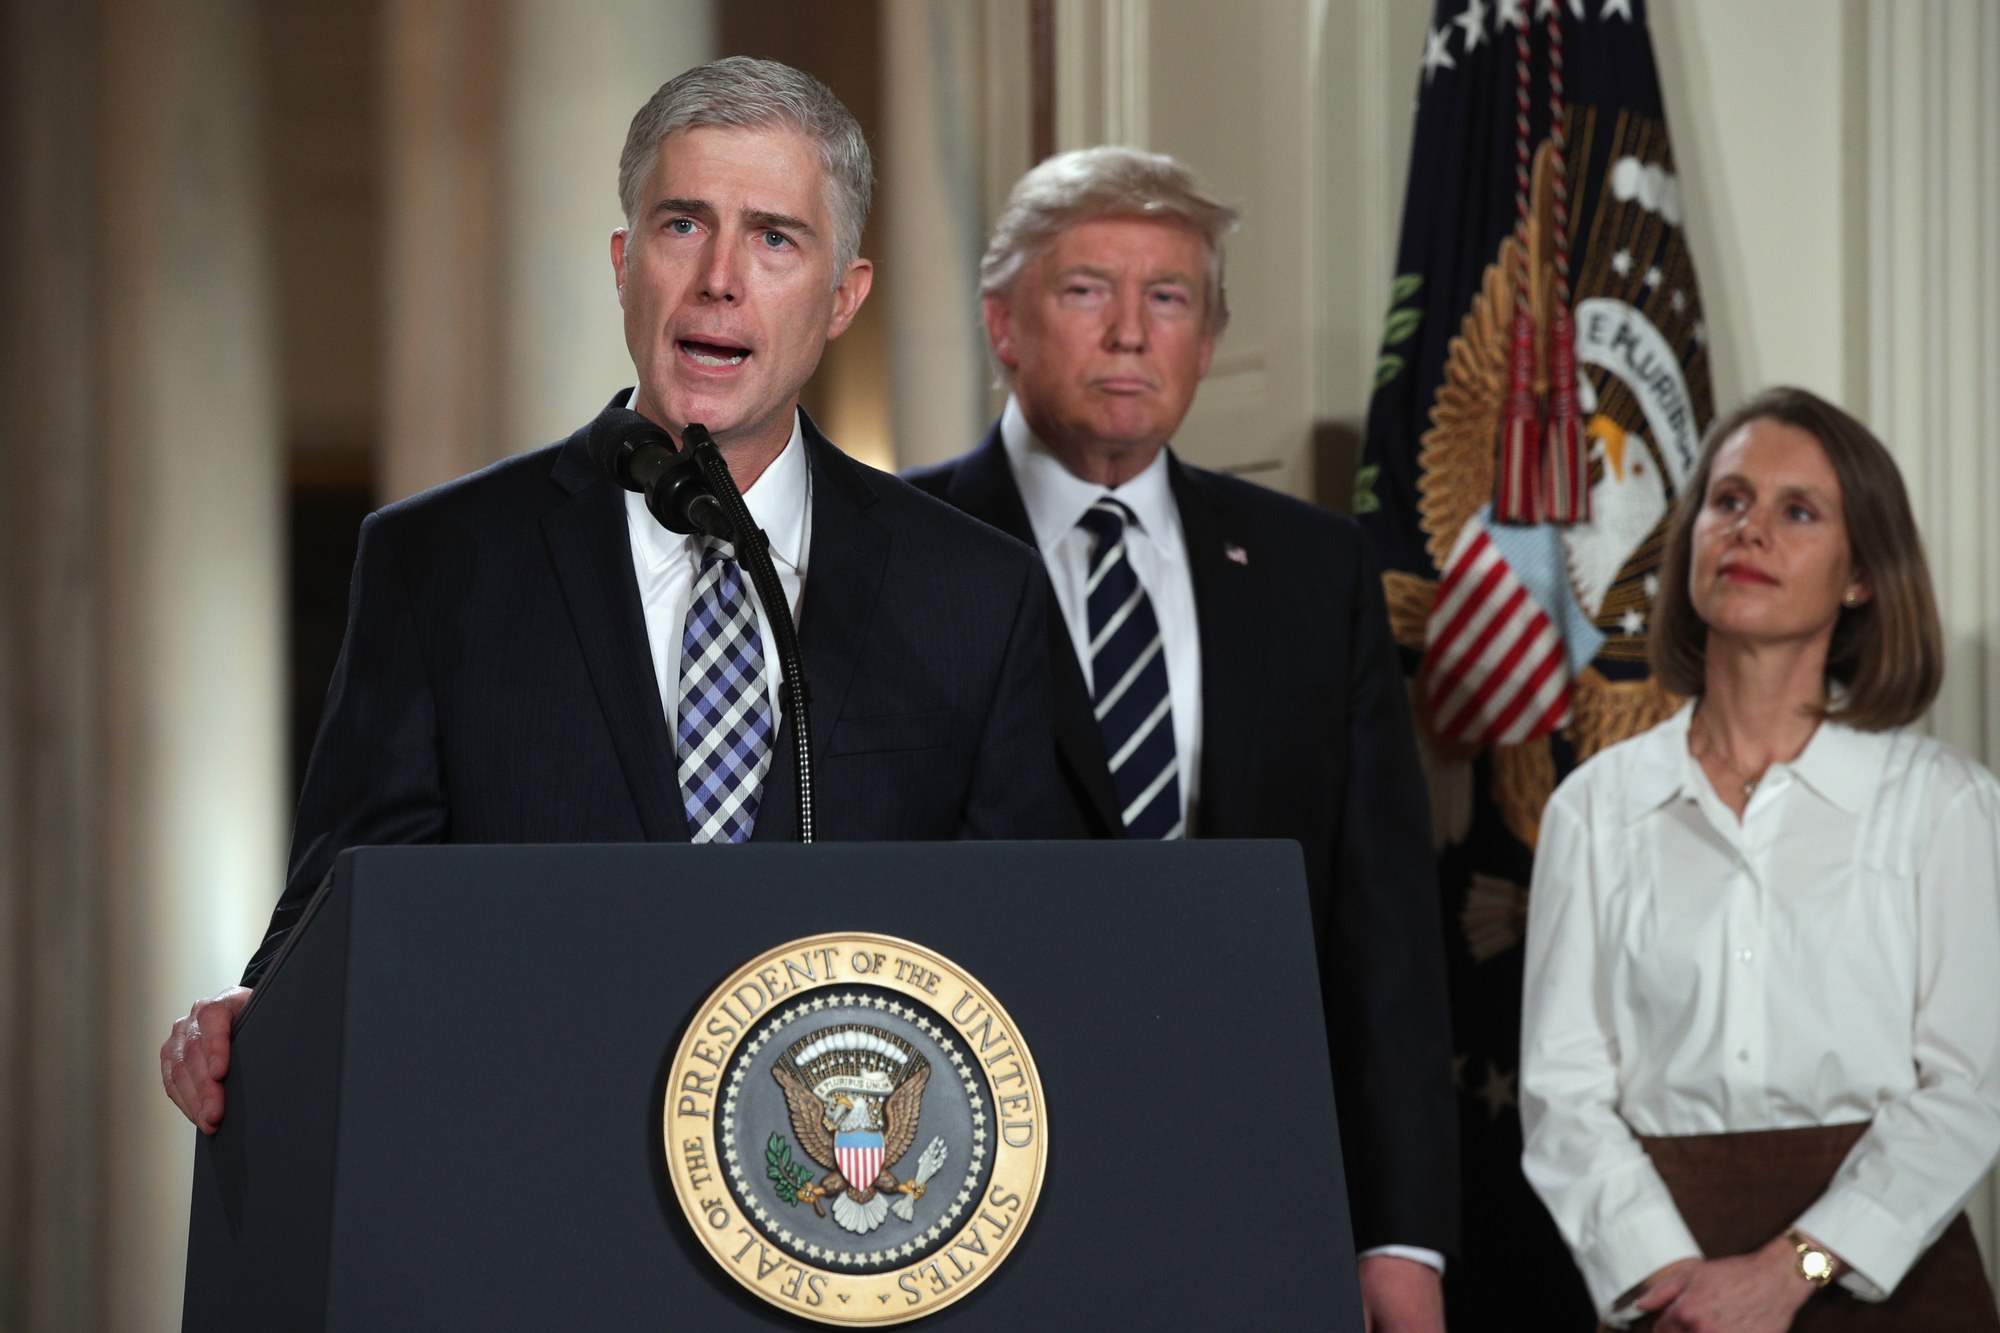 Neil Gorsuch is From Colorado, But Does He Support Marijuana Legalization?